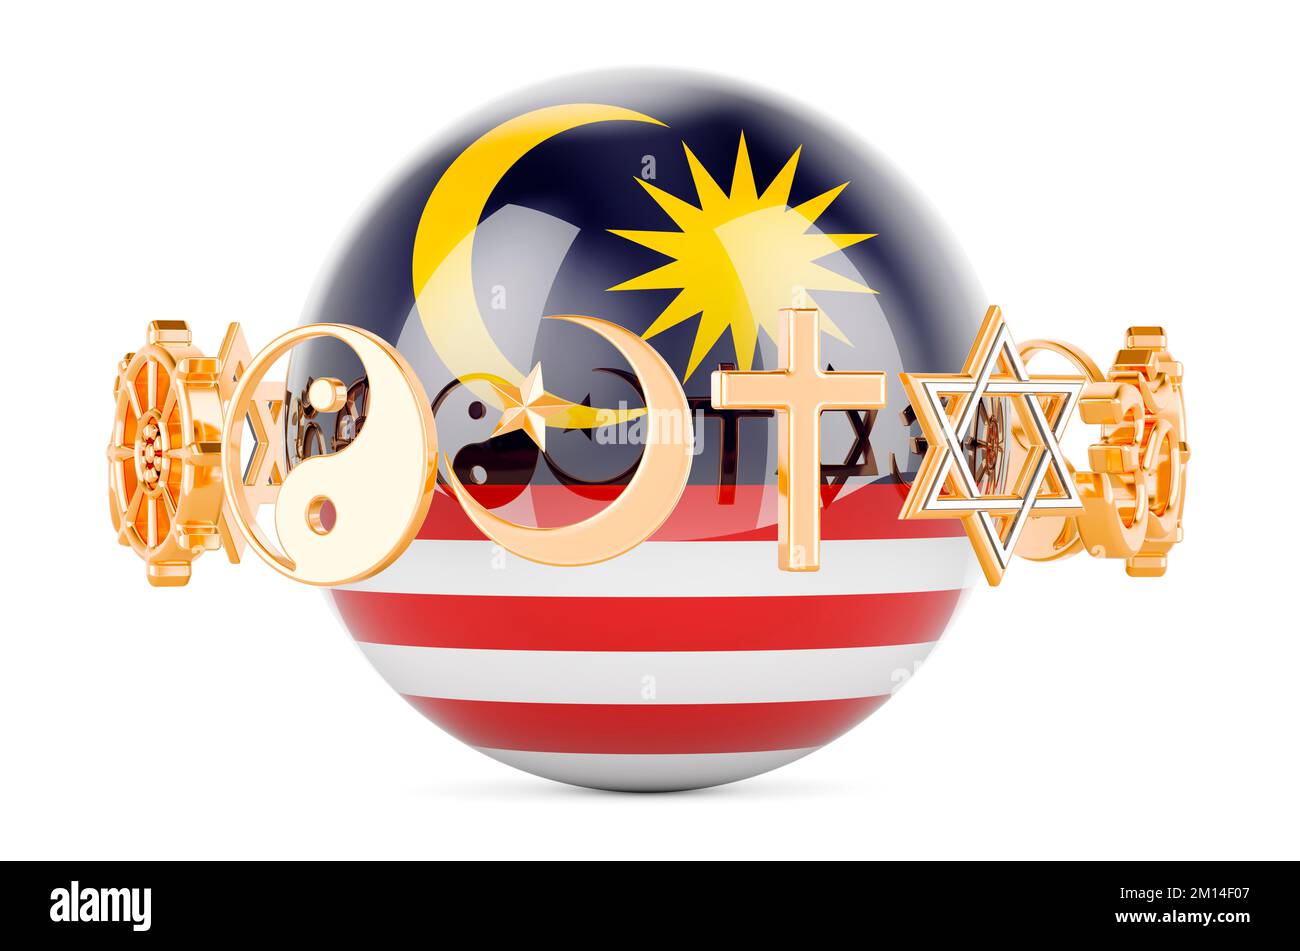 Malaysian flag painted on sphere with religions symbols around, 3D rendering isolated on white background Stock Photo